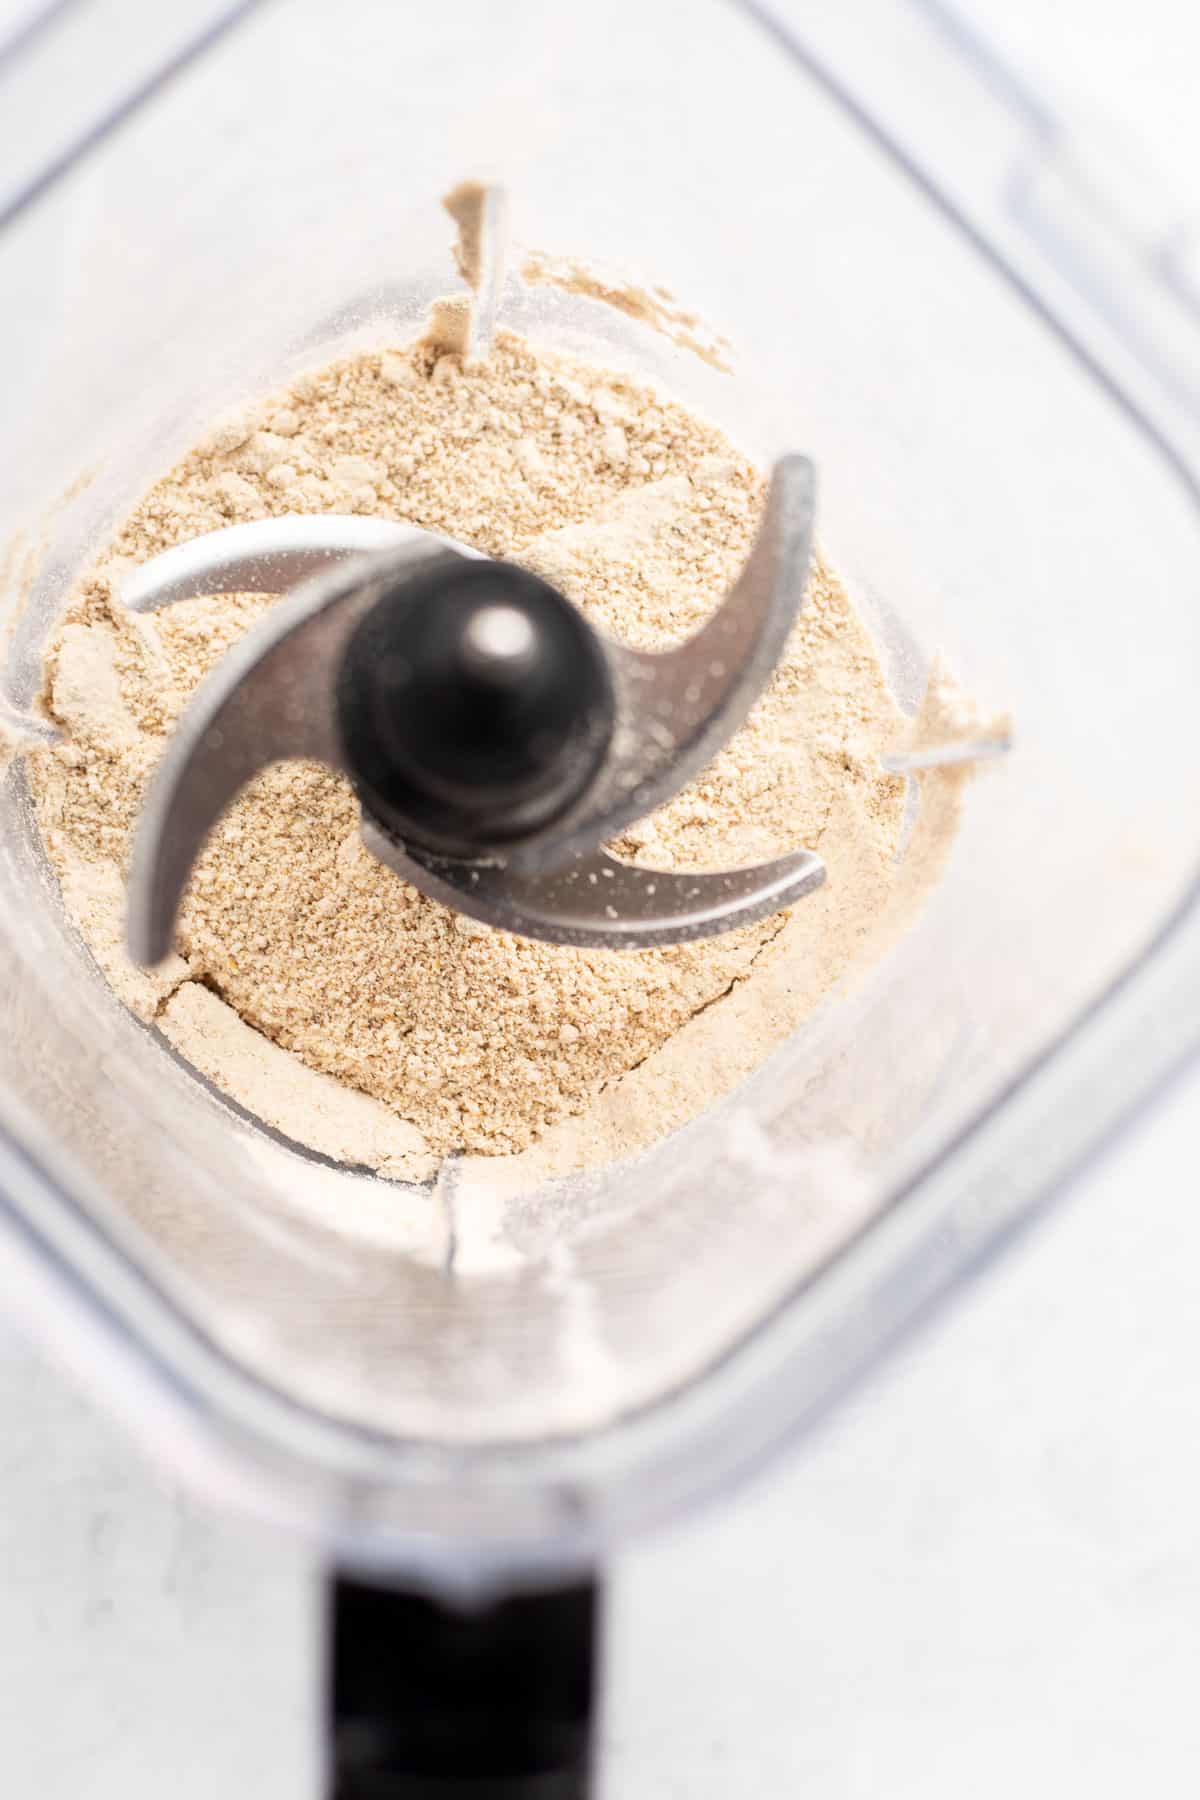 oats and hemp seeds blended into powder in a blender.